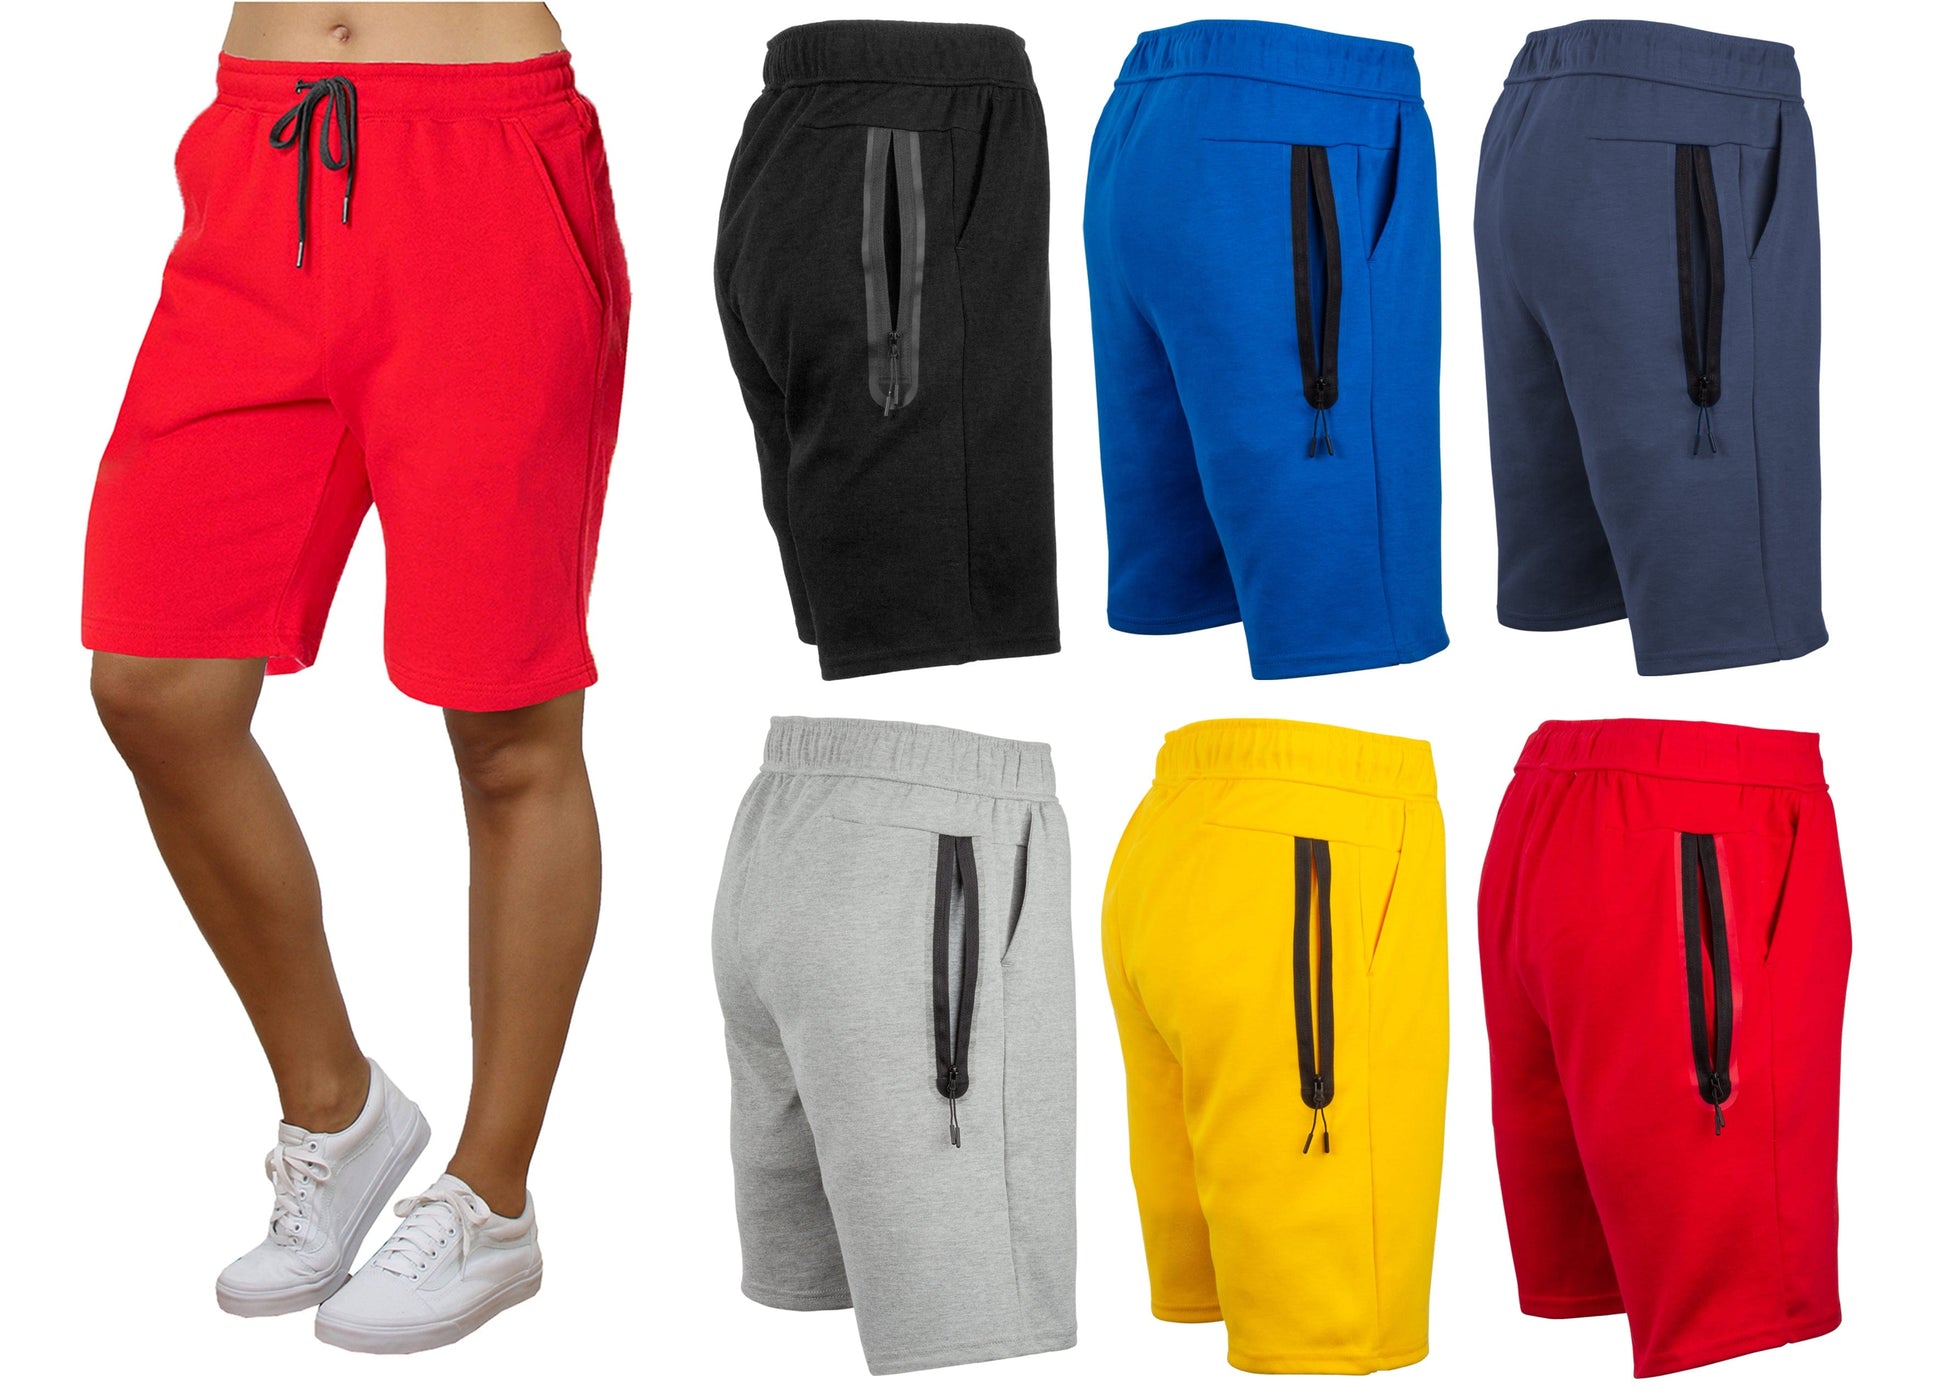 3-PACK Women's Tech Fleece Performance Active Shorts Set - GalaxybyHarvic